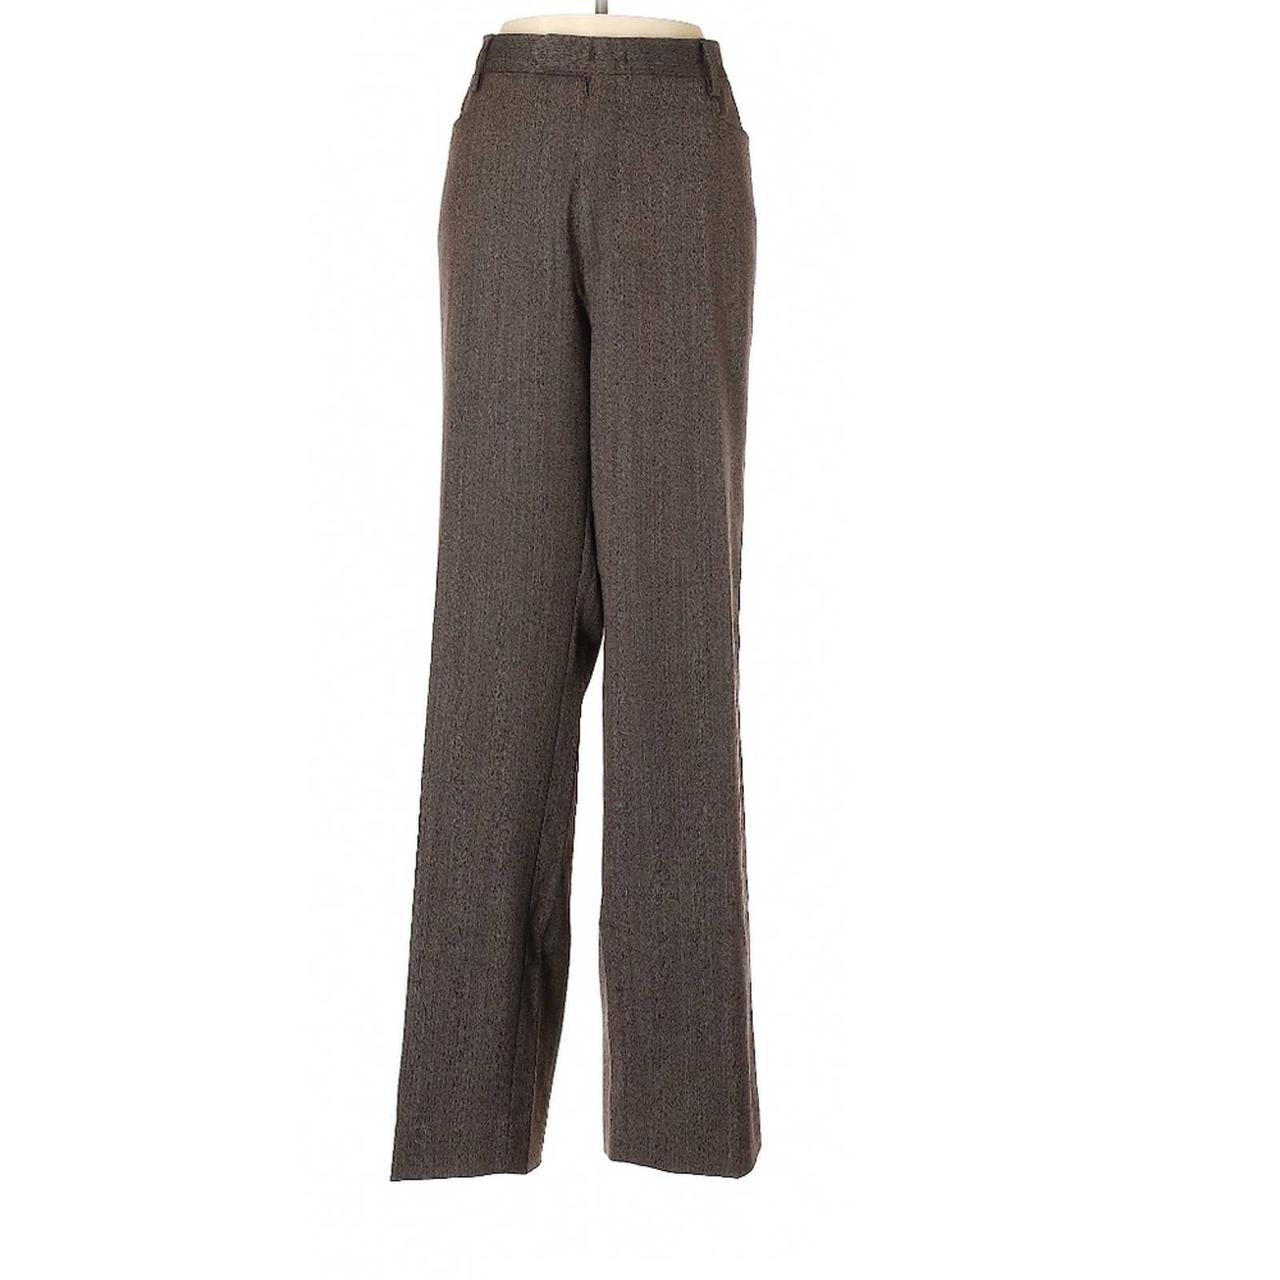 Product Image 1 - Reiss Brown High Rise Pants.
Size